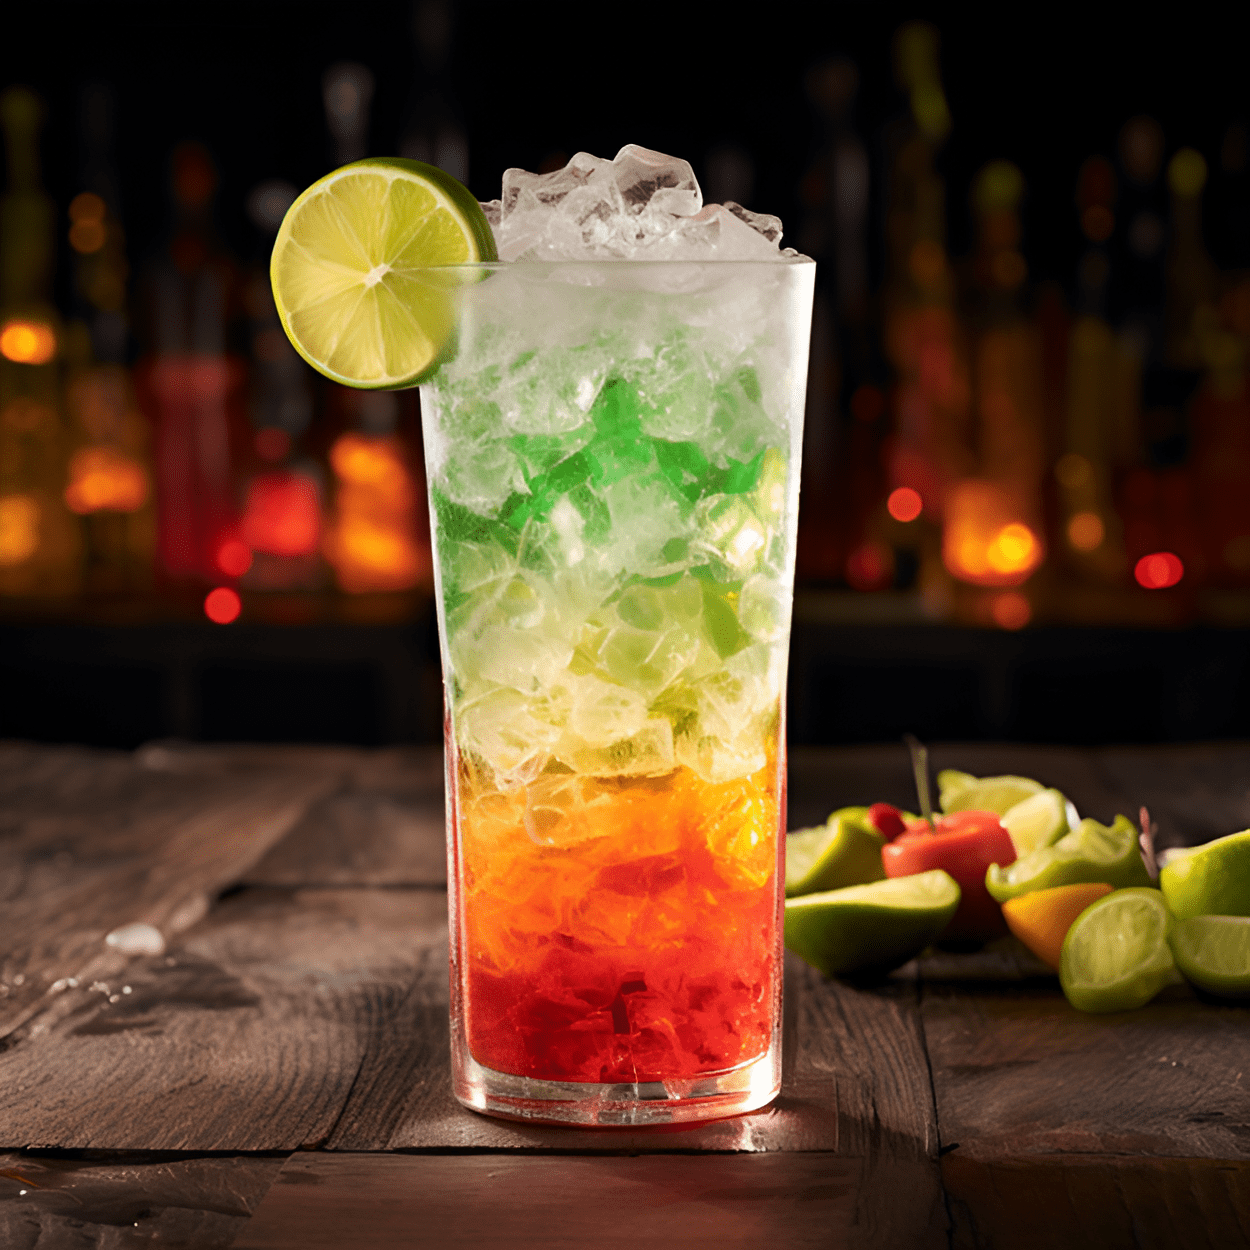 This cocktail is a delightful blend of sweet, tangy, and refreshing. The tropical flavors of pineapple and orange are balanced by the tartness of the lime, while the vodka provides a smooth, strong base. The Red Bull gives it a unique, energizing kick.